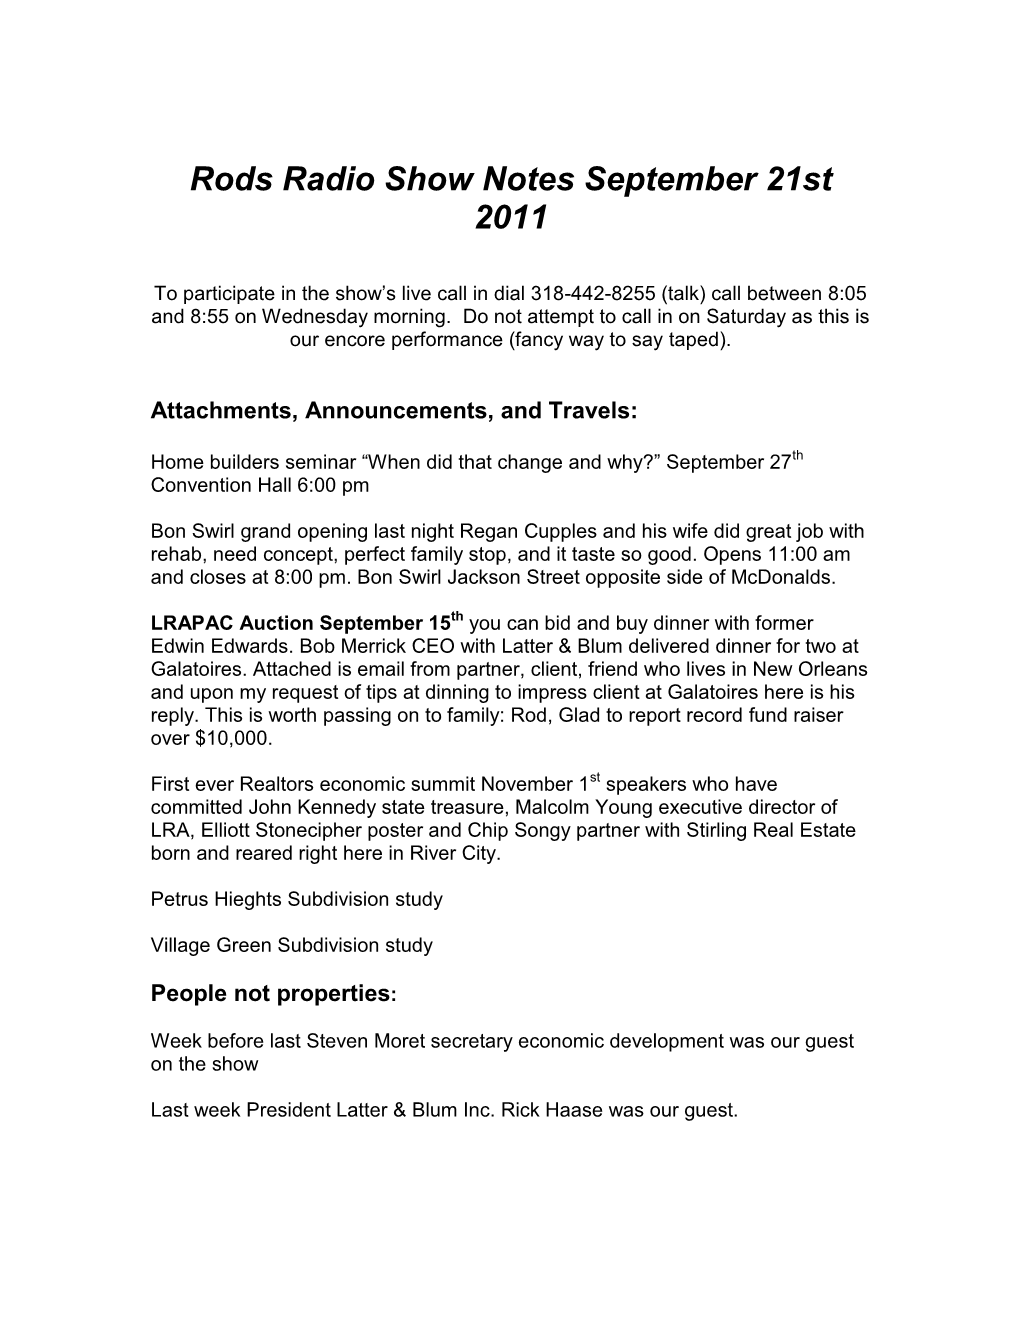 Rods Radio Show Notes September 21St 2011